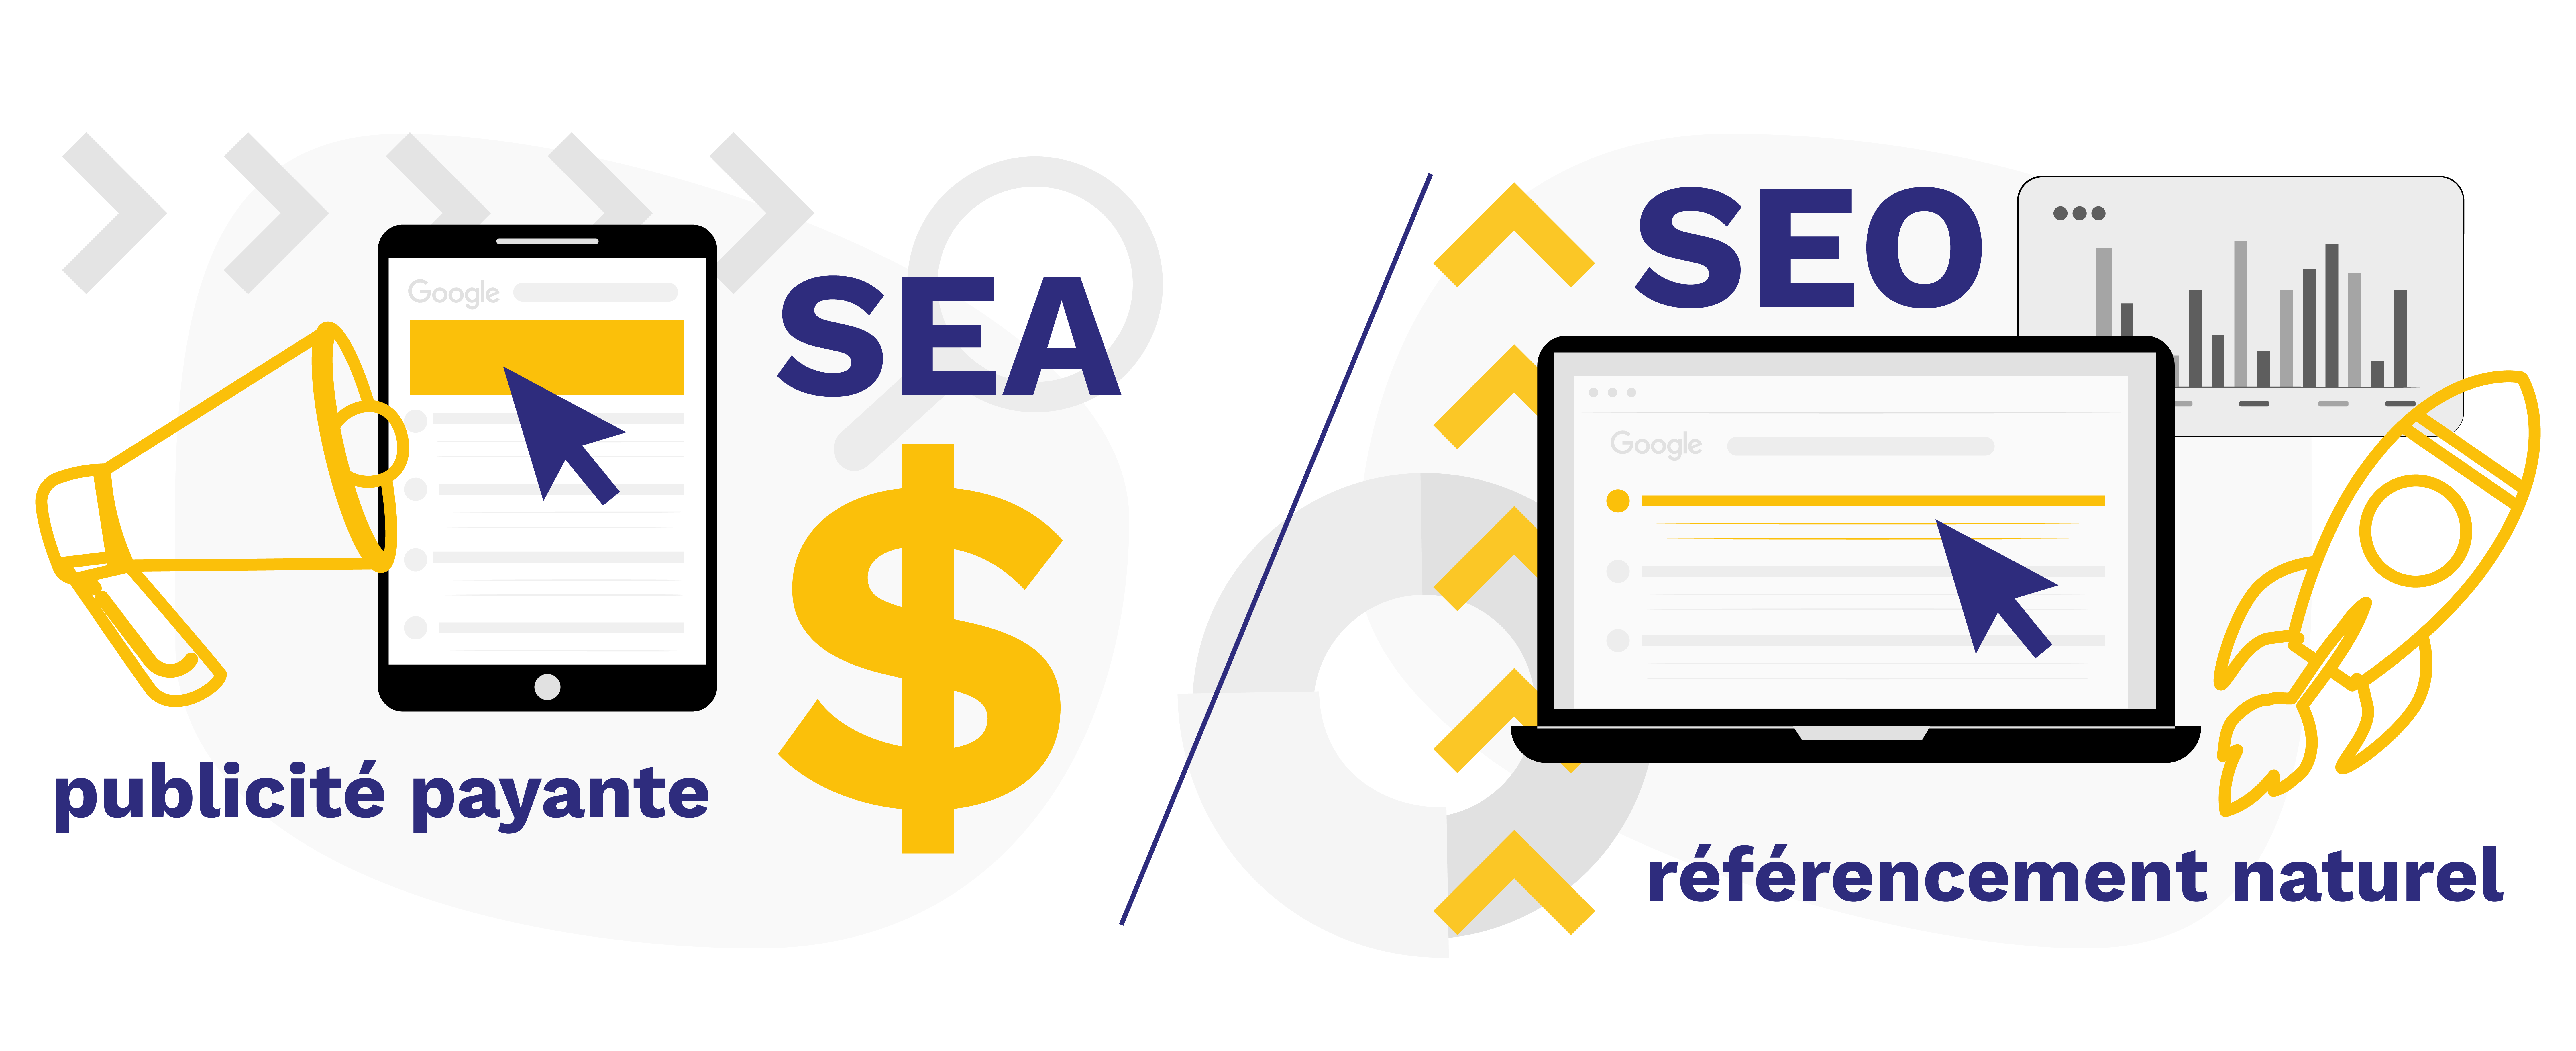 Habefast Page Service Sea Referencement Payant Sea Ou Seo